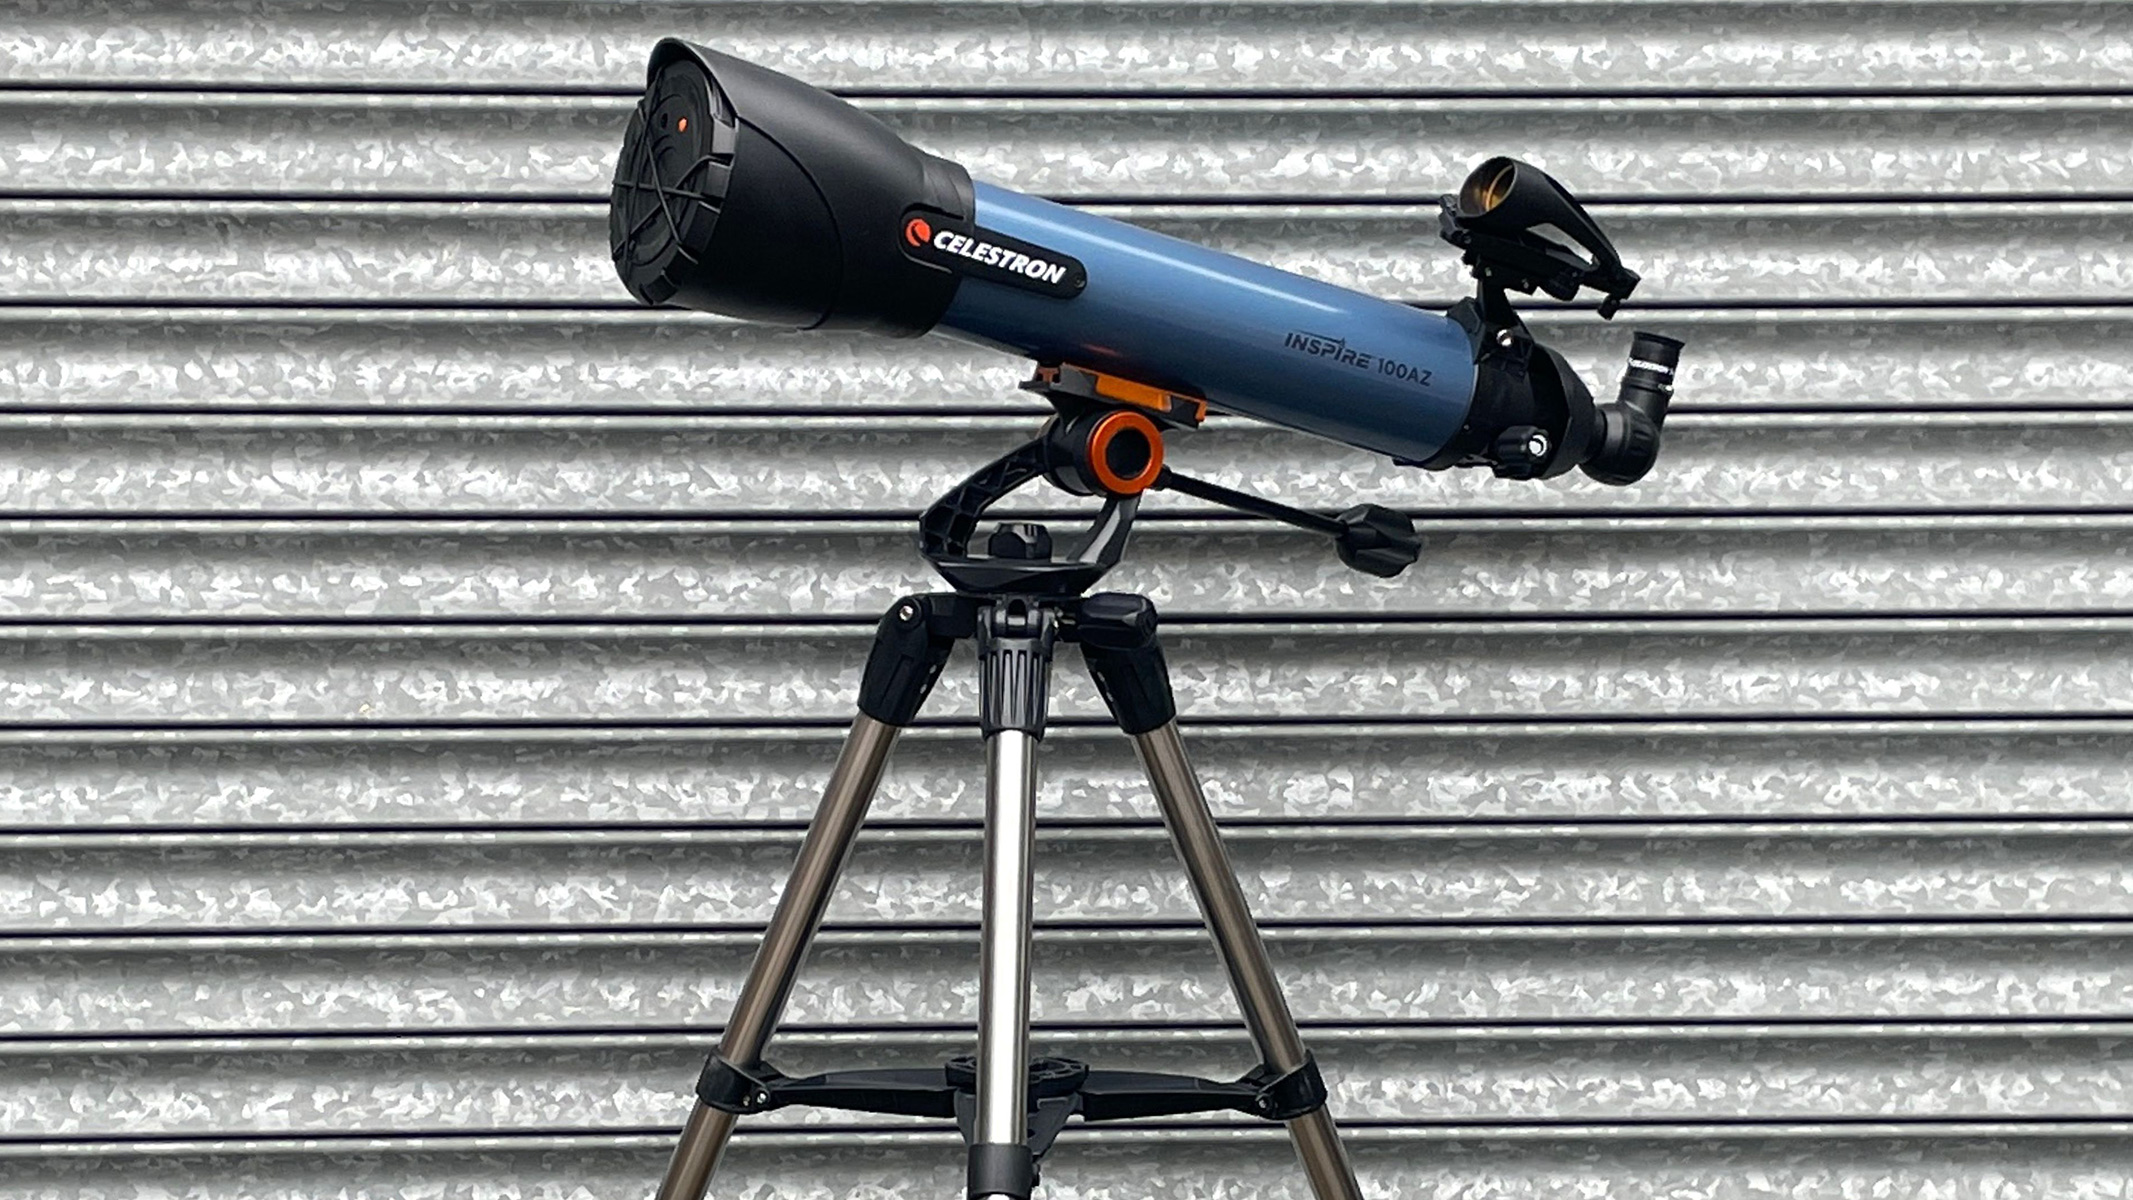 Charotar Globe Daily A side profile view of the telescope against a corrugated iron backdrop